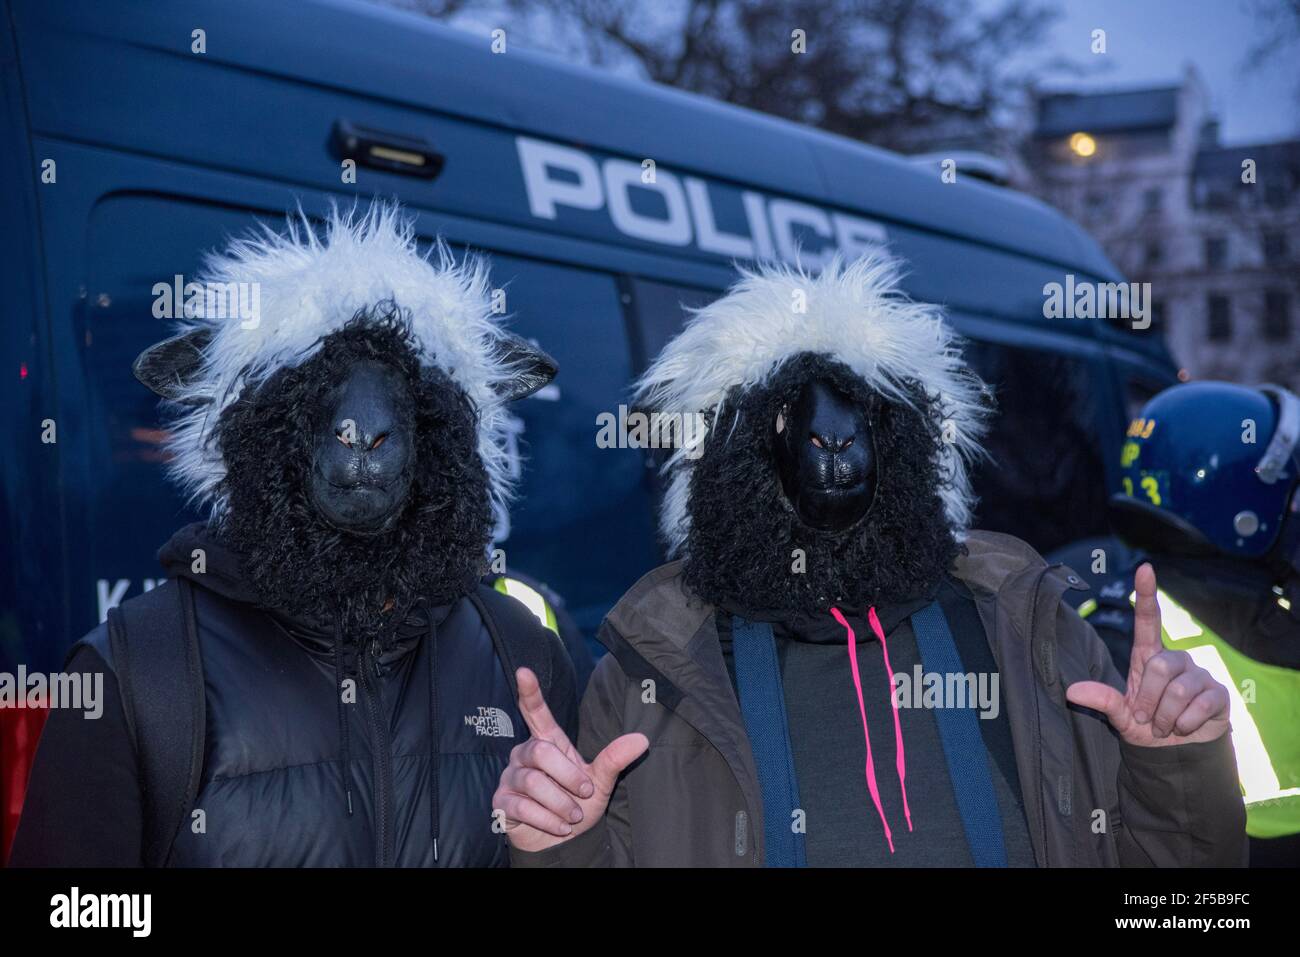 London, 20th March, 2021. Protesters 'don't follow the sheep' during Anti-lockdown protests in London, UK. Credit: Kevin Seivwright/Alamy Live News. Stock Photo